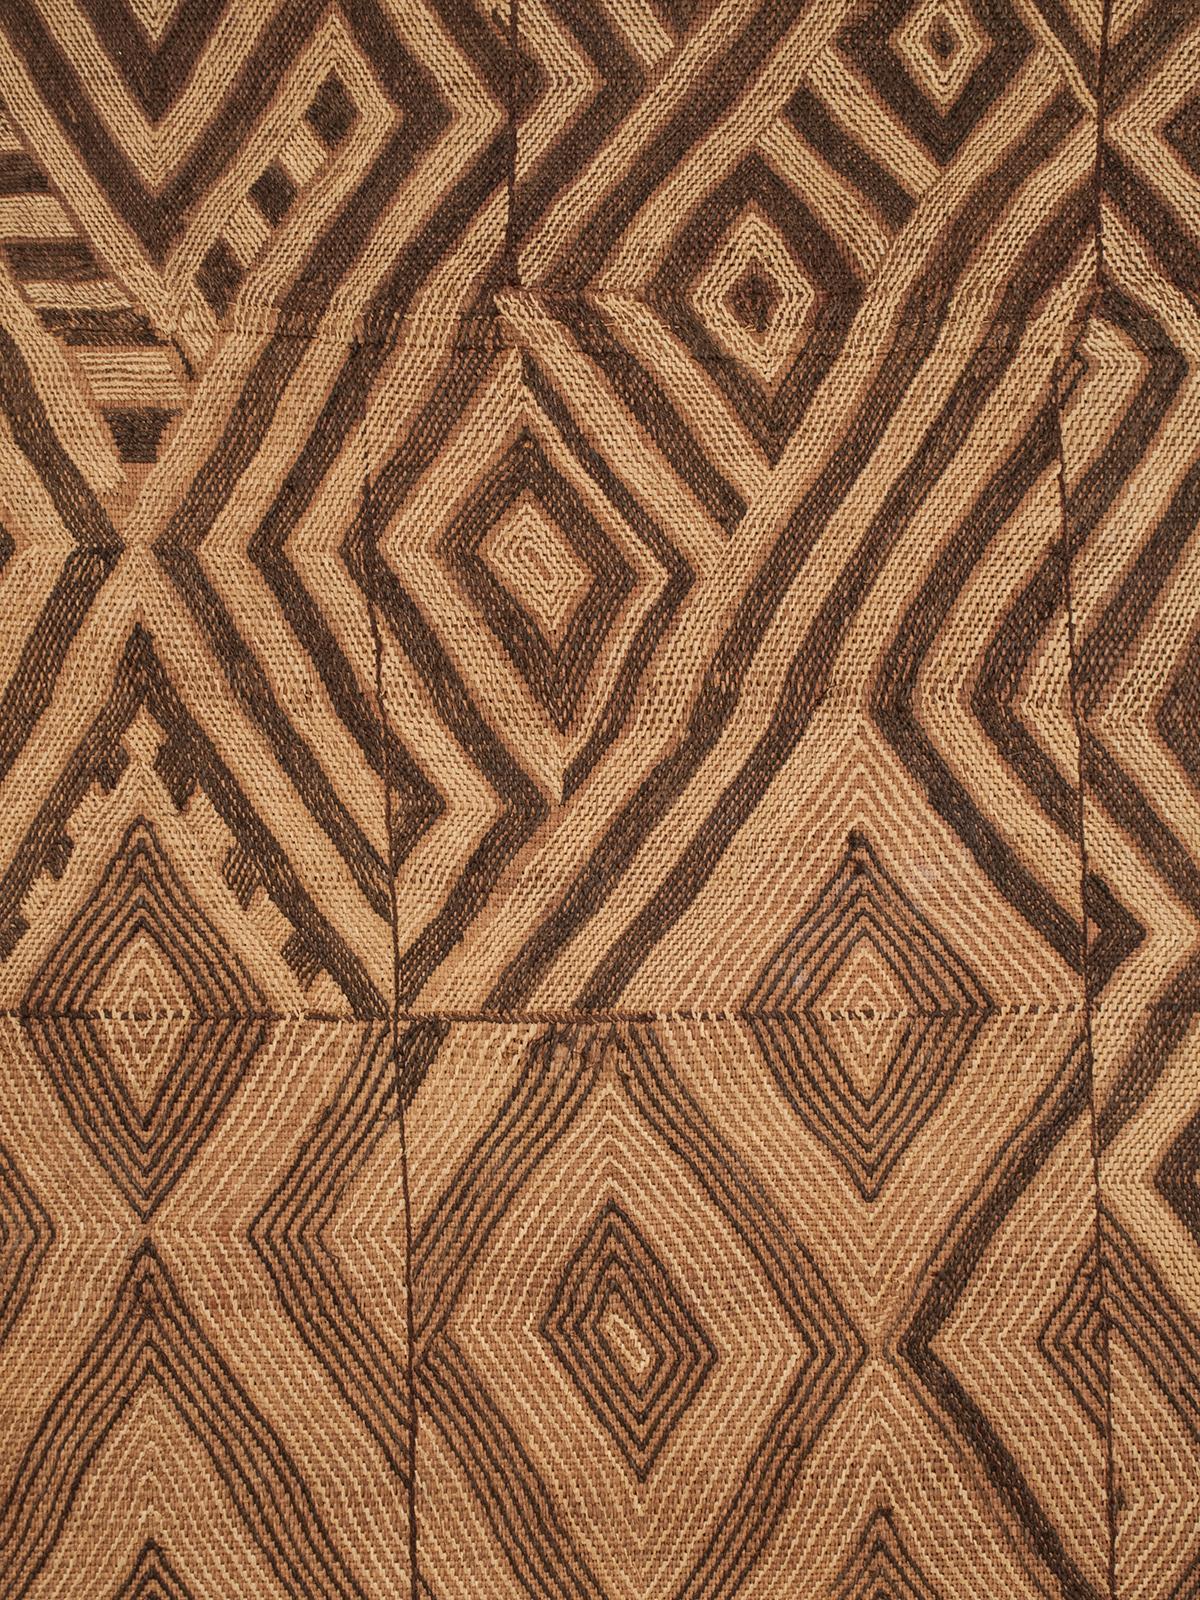 Mid-20th century dance skirt panel, Kuba, D.R.Congo

A visually stunning jazzy embroidered raffia skirt panel from the Kuba people of DR Congo with diamond shapes that morph into zig-zags, lines and X patterns.
The panel is professionally mounted on